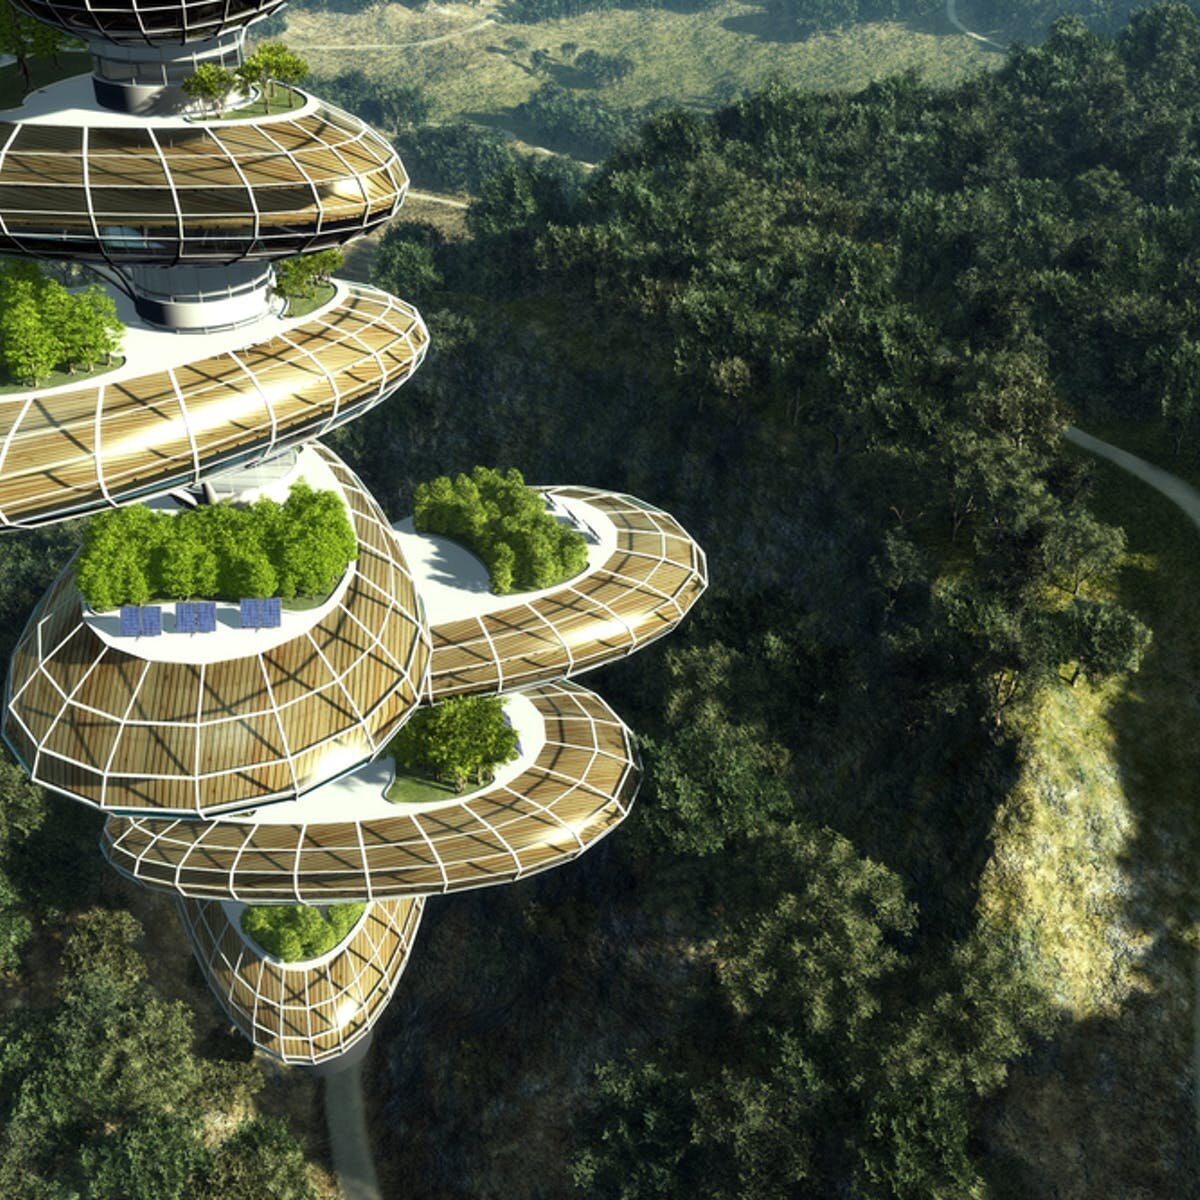 Solarpunk Cities: Notes for a Manifesto